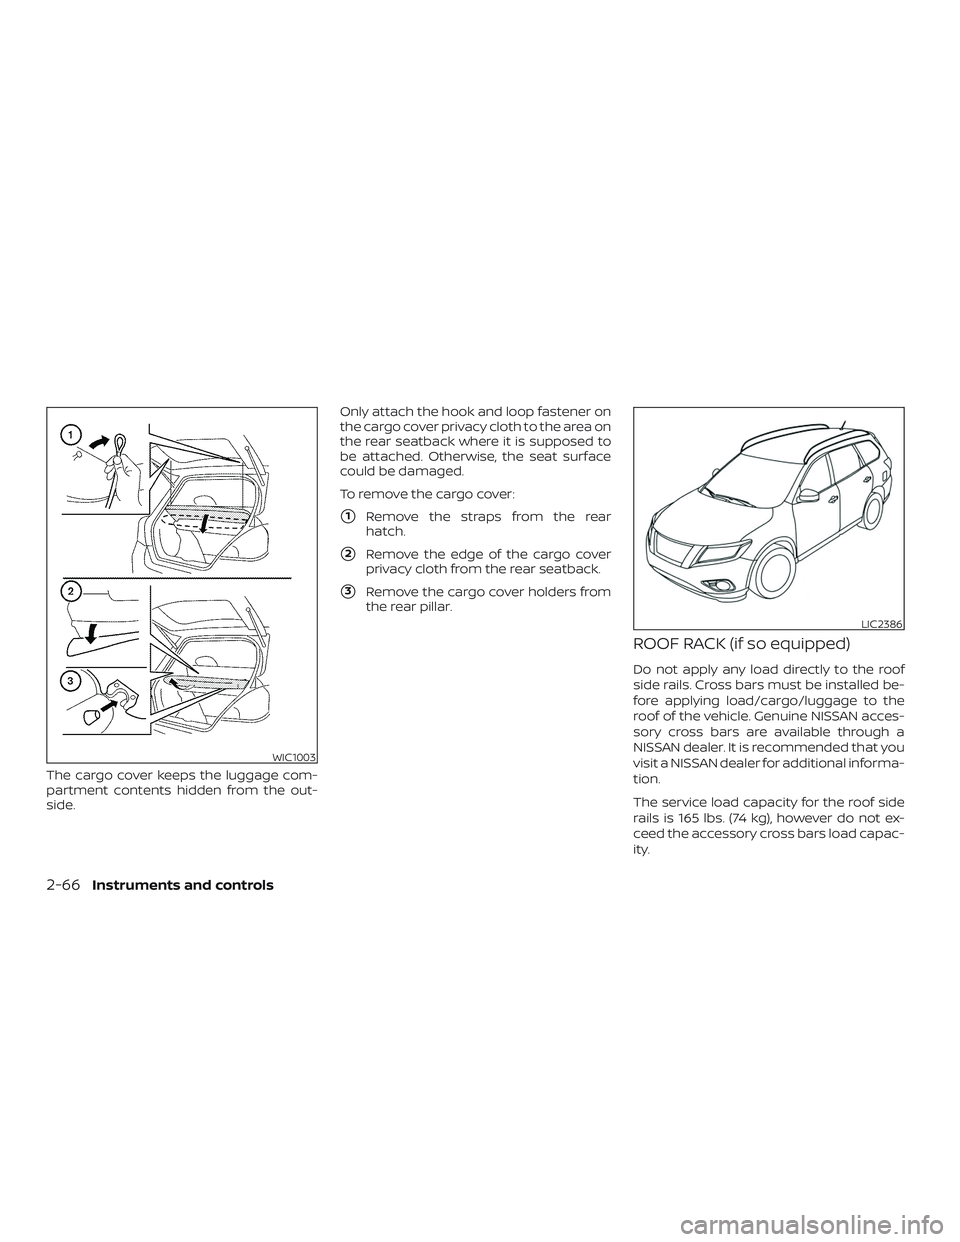 NISSAN ROGUE HYBRID 2019  Owners Manual The cargo cover keeps the luggage com-
partment contents hidden from the out-
side.Only attach the hook and loop fastener on
the cargo cover privacy cloth to the area on
the rear seatback where it is 